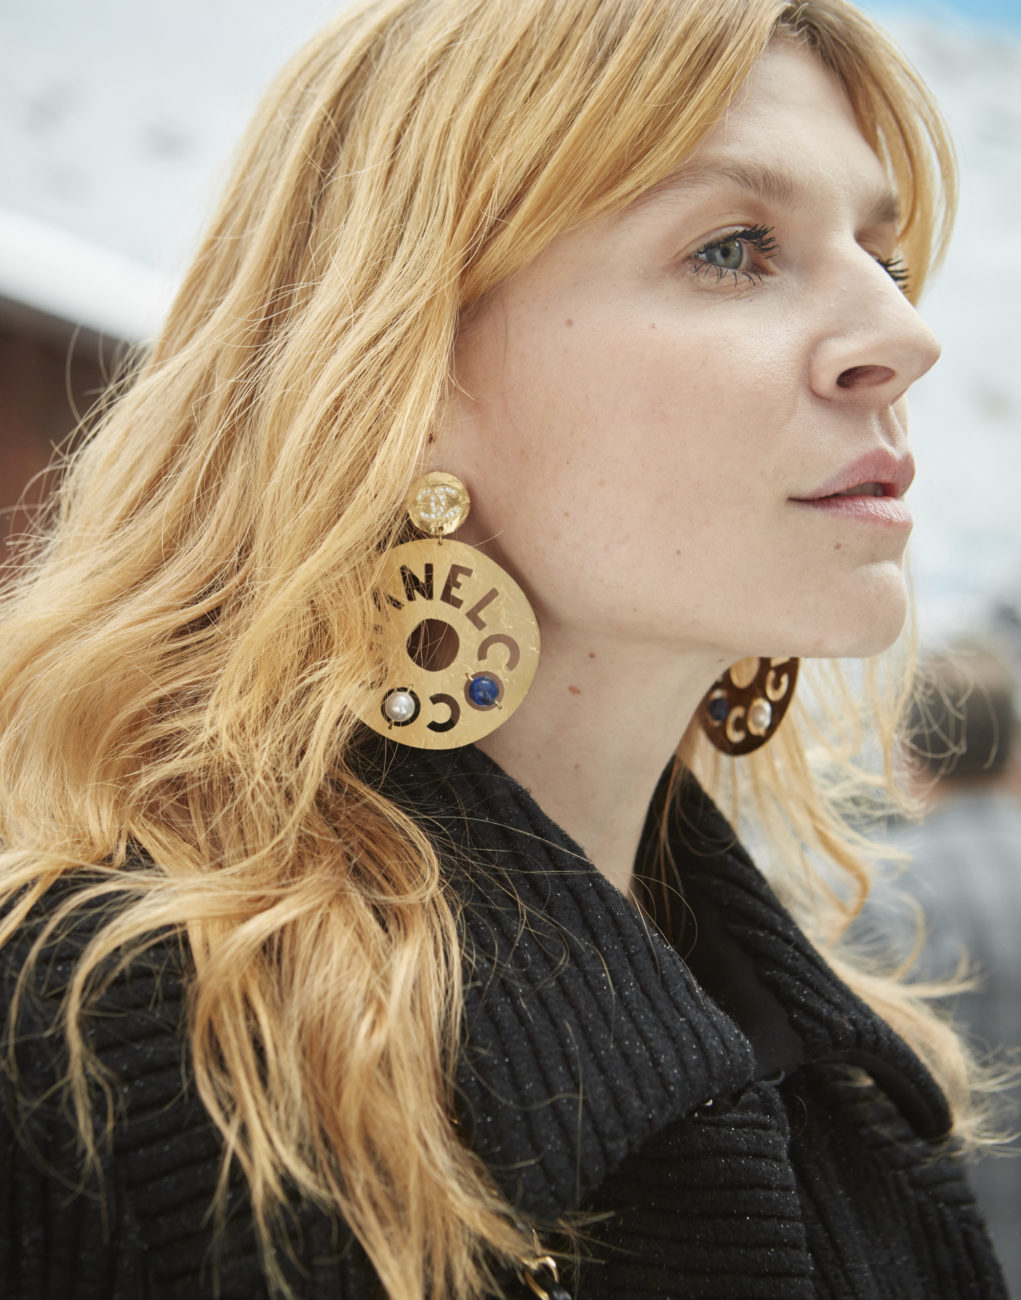 Clémence Poesy, Chanel FW 2019 Collection, Courtesy of Chanel